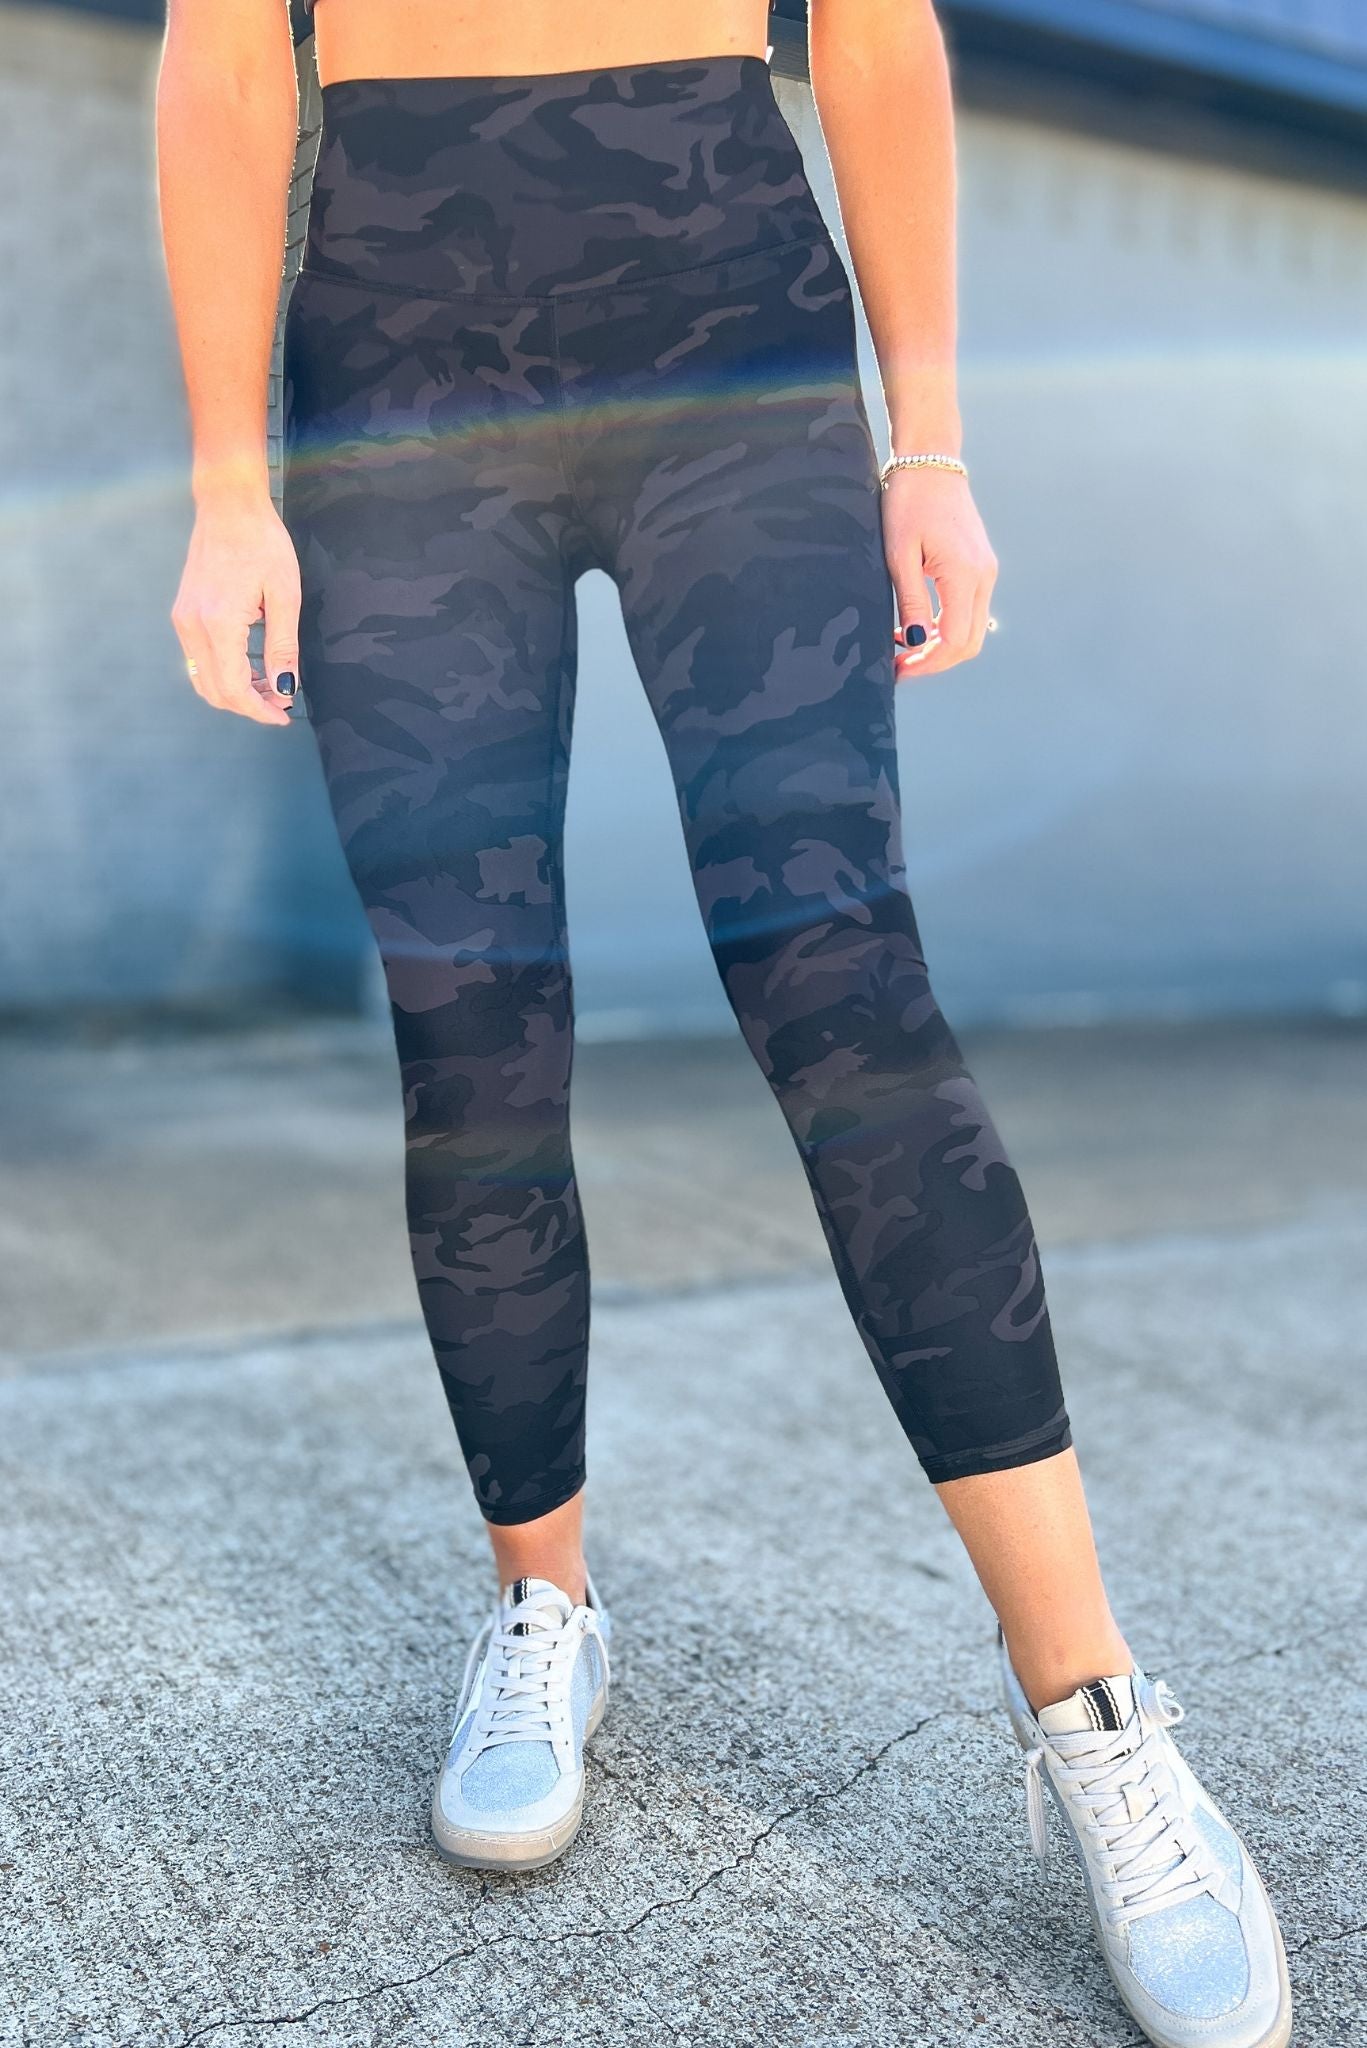 Black Camo Highwaist Seamless LeggingsSSYS The Label, athleisure, everyday wear, mom style, layered look, must have, shop style your senses by mallory fitzsimmons